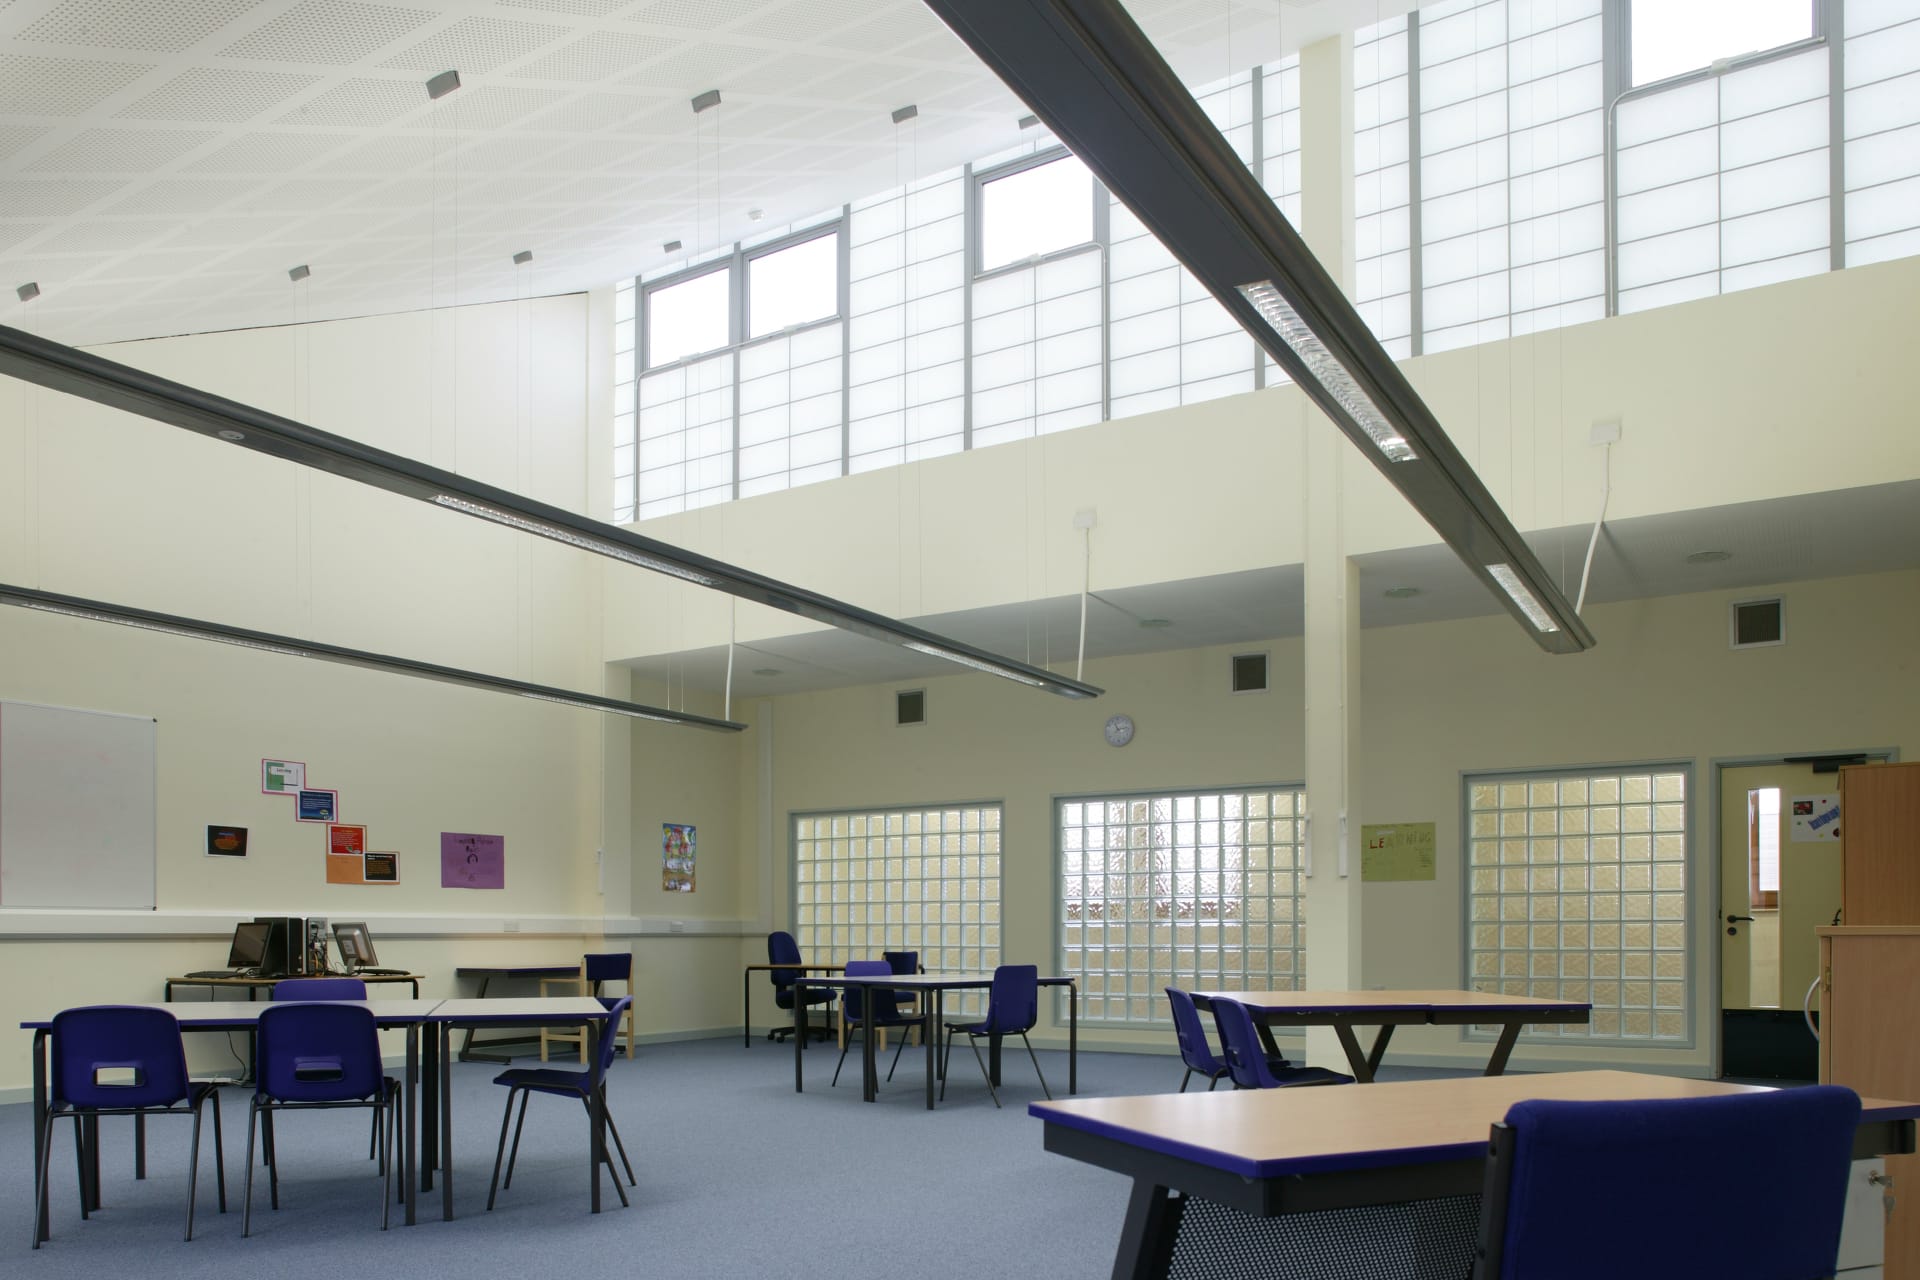 Oakgrove School kalwall cladding vaulted classrooms